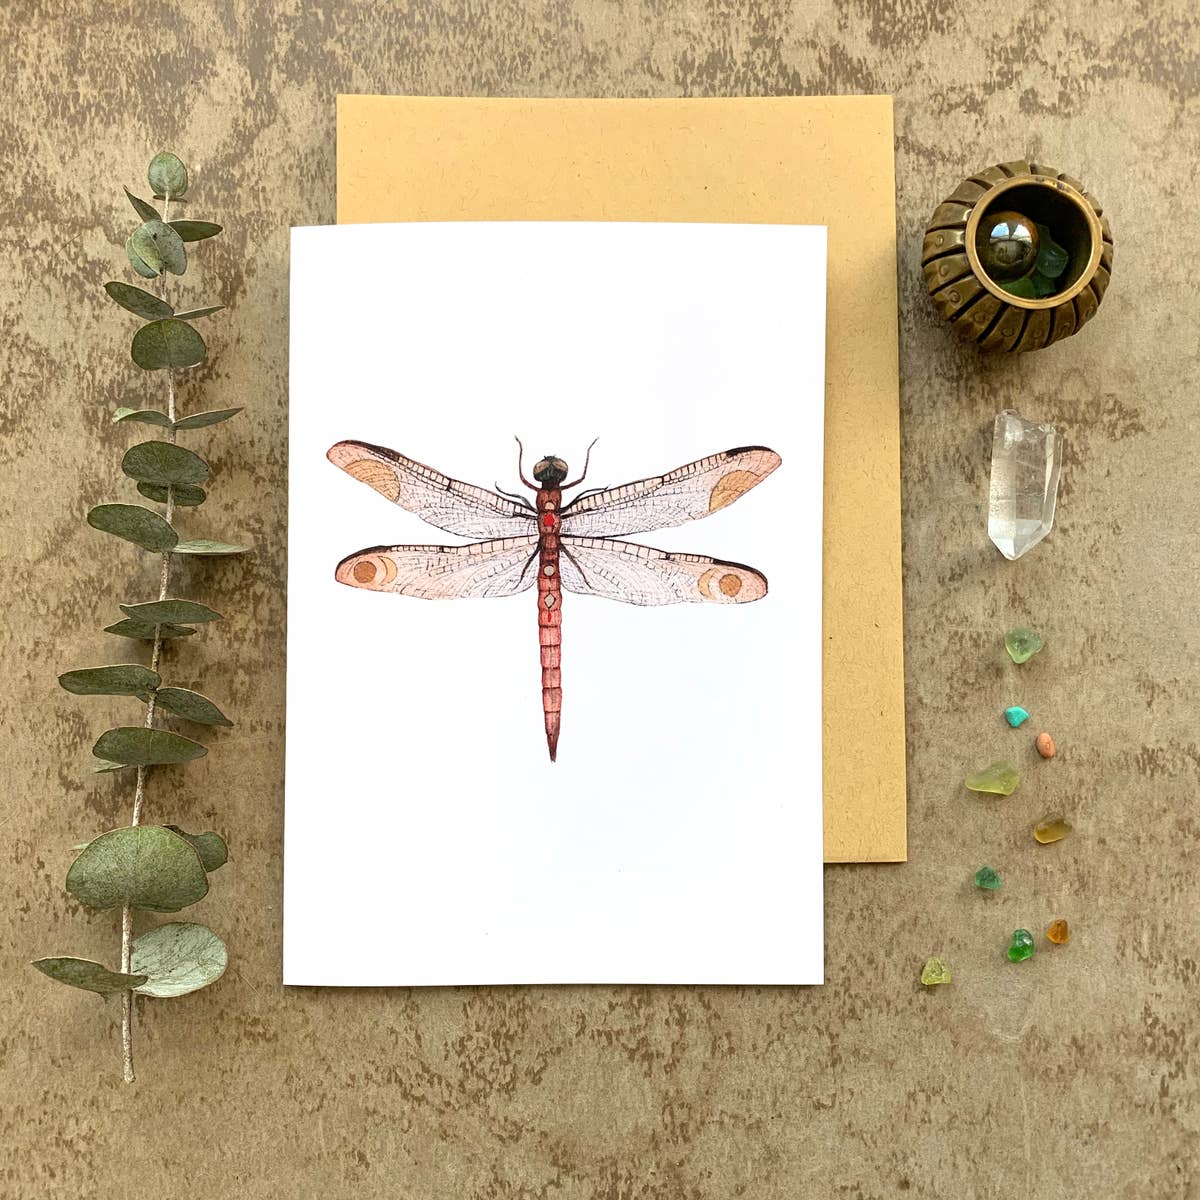 Dragonfly card is detailed and whimsical at the same time.  